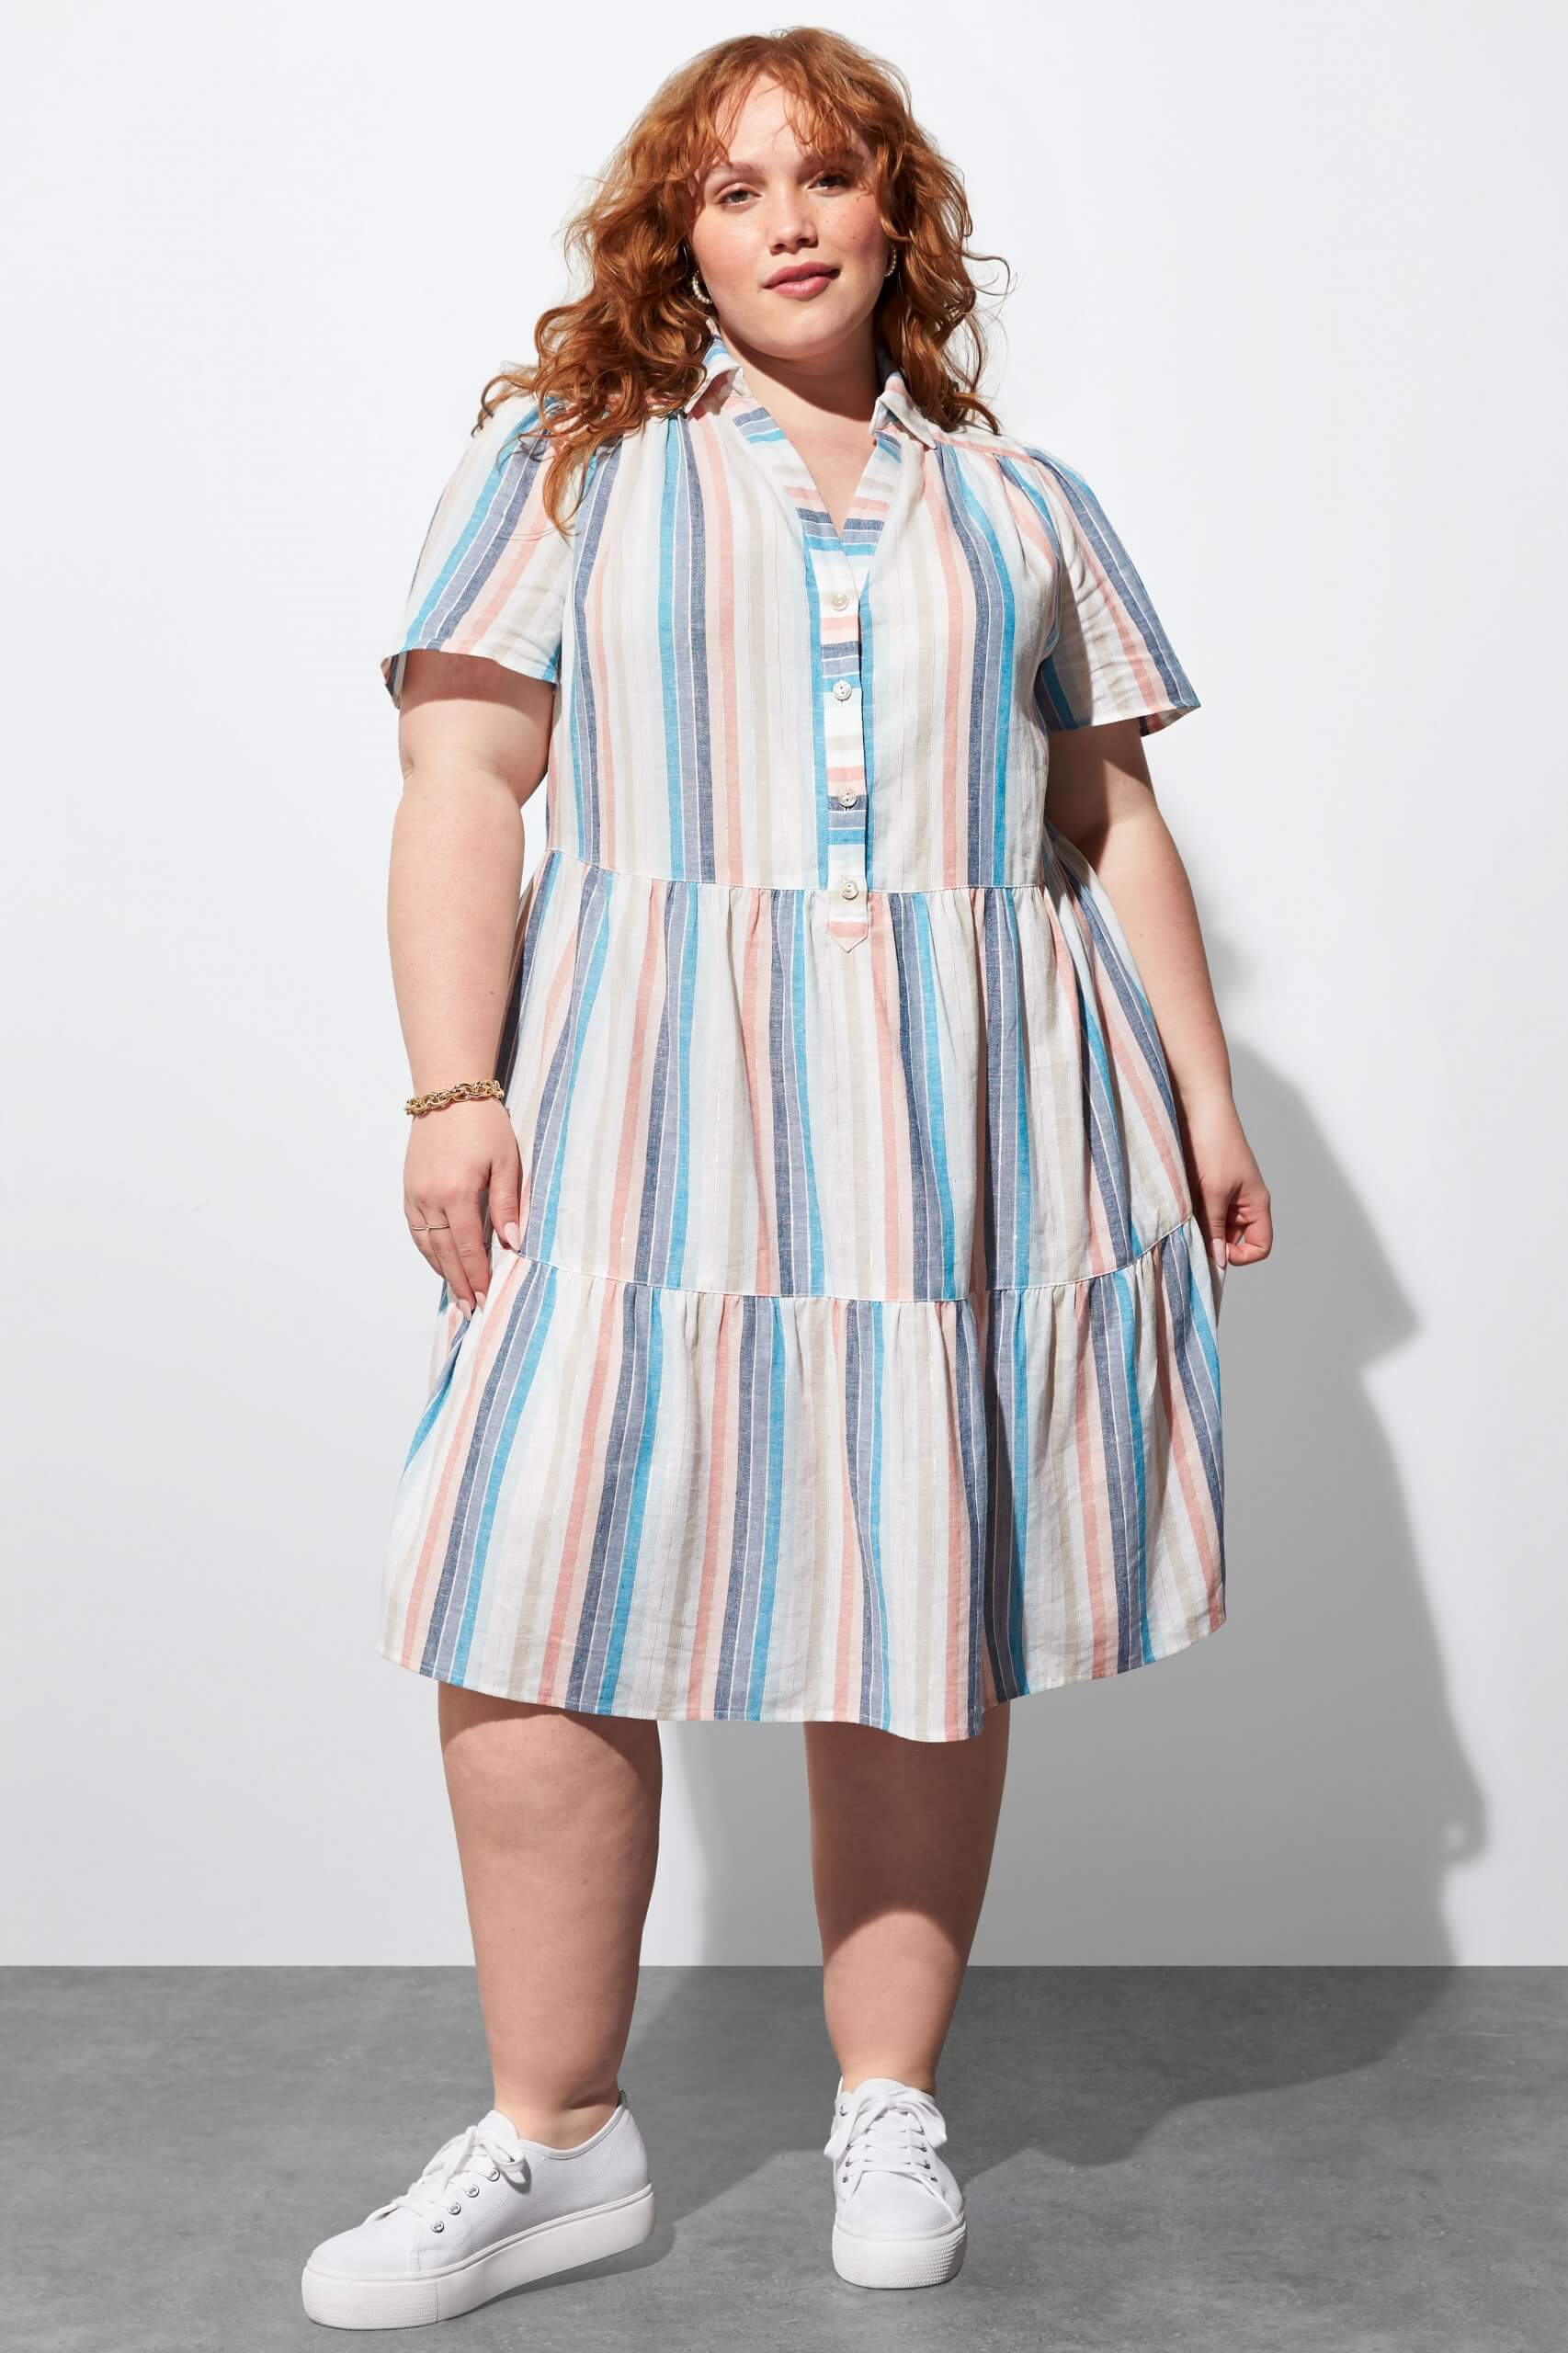 Stitch Fix Women's model wearing white, pink and blue striped shirt dress and white sneakers. 